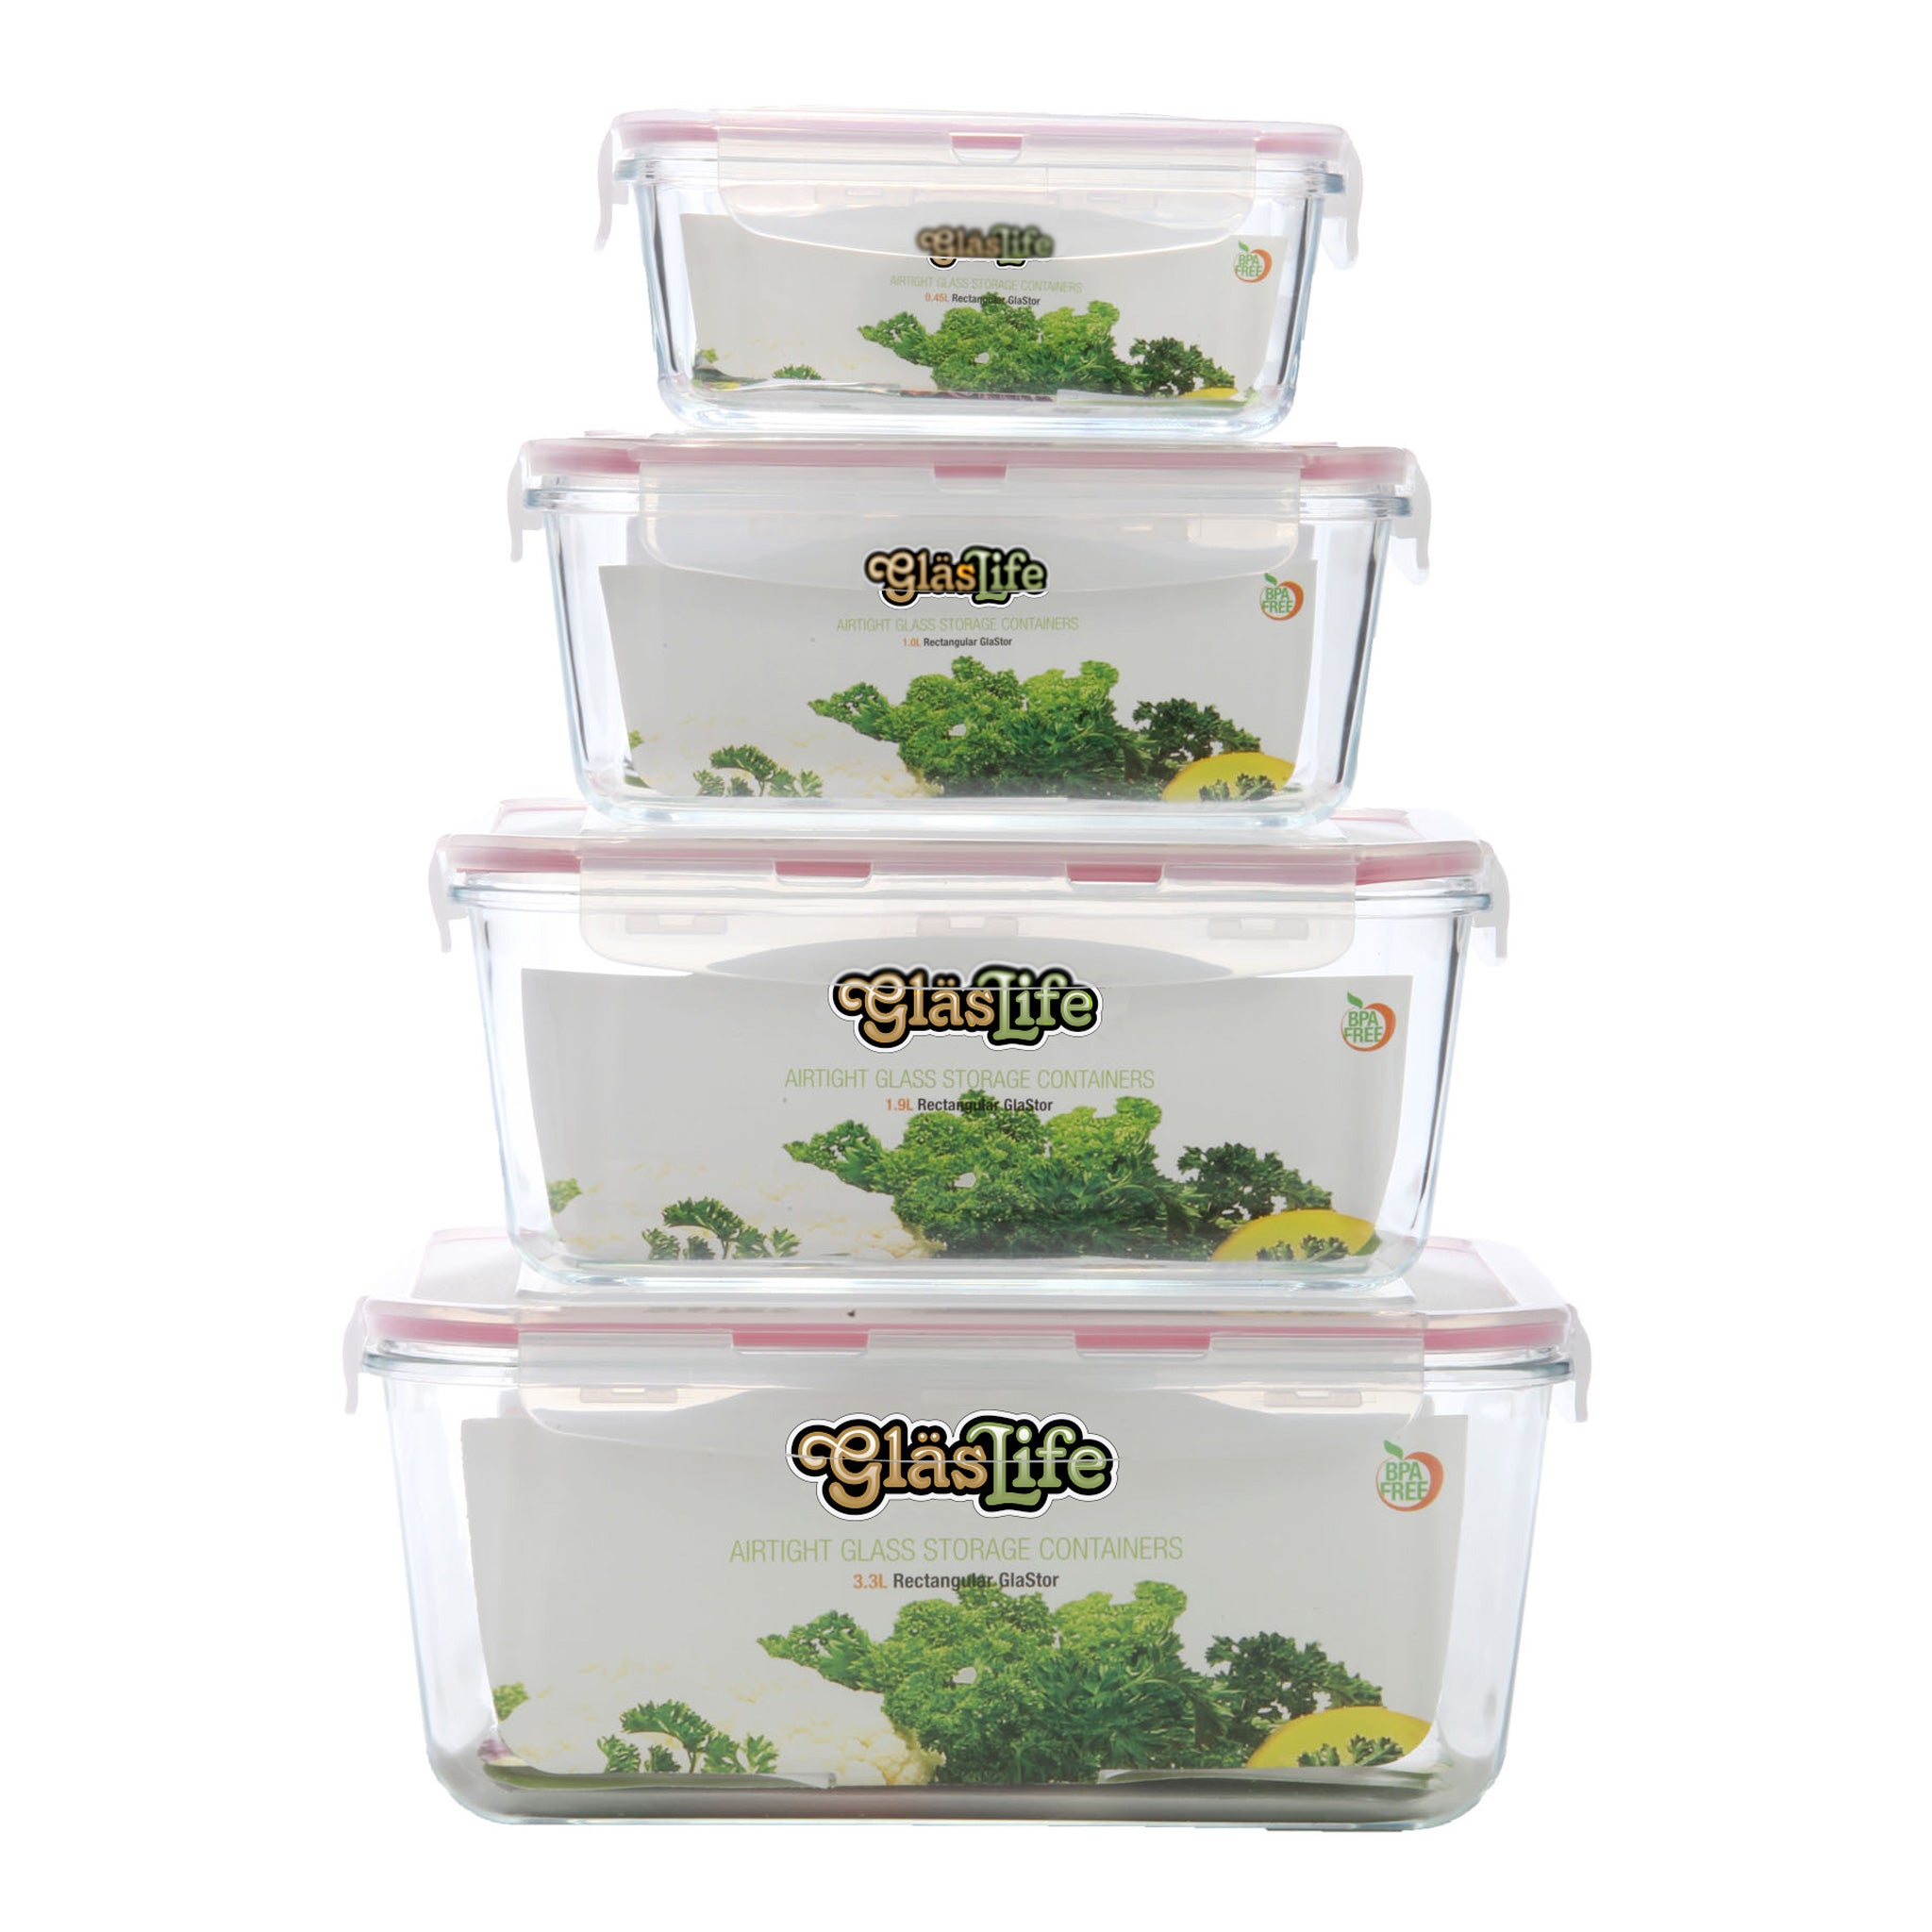 GlasLife® Airtight Rectangular Glass Containers (Set of 4)